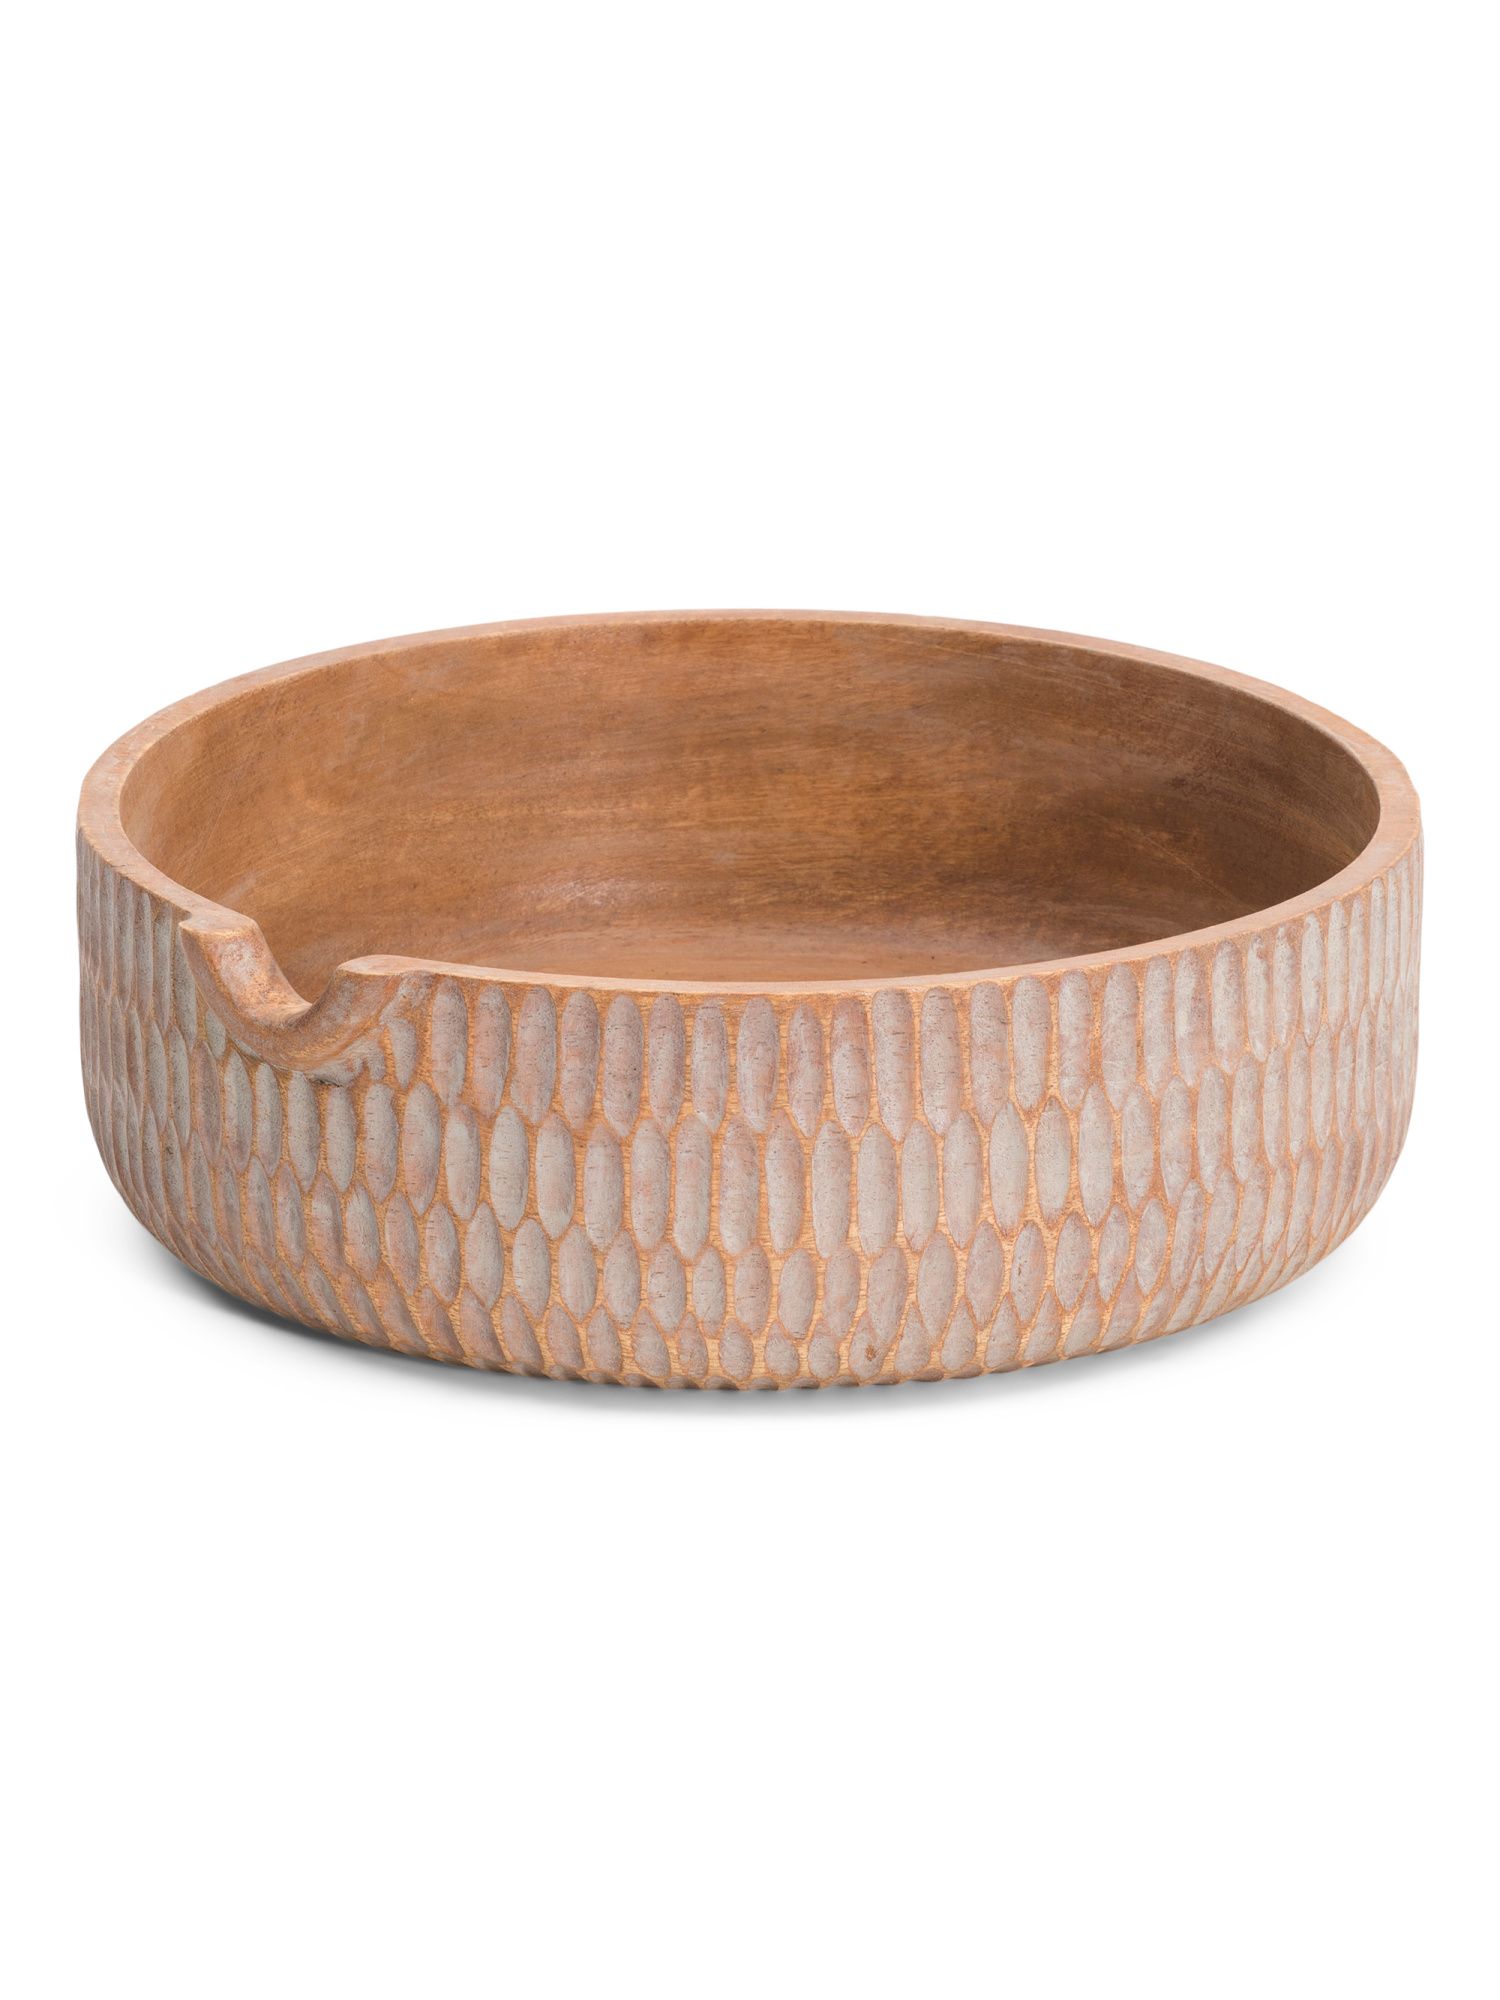 Hand Carved Mango Wood Bowl With Spout | TJ Maxx